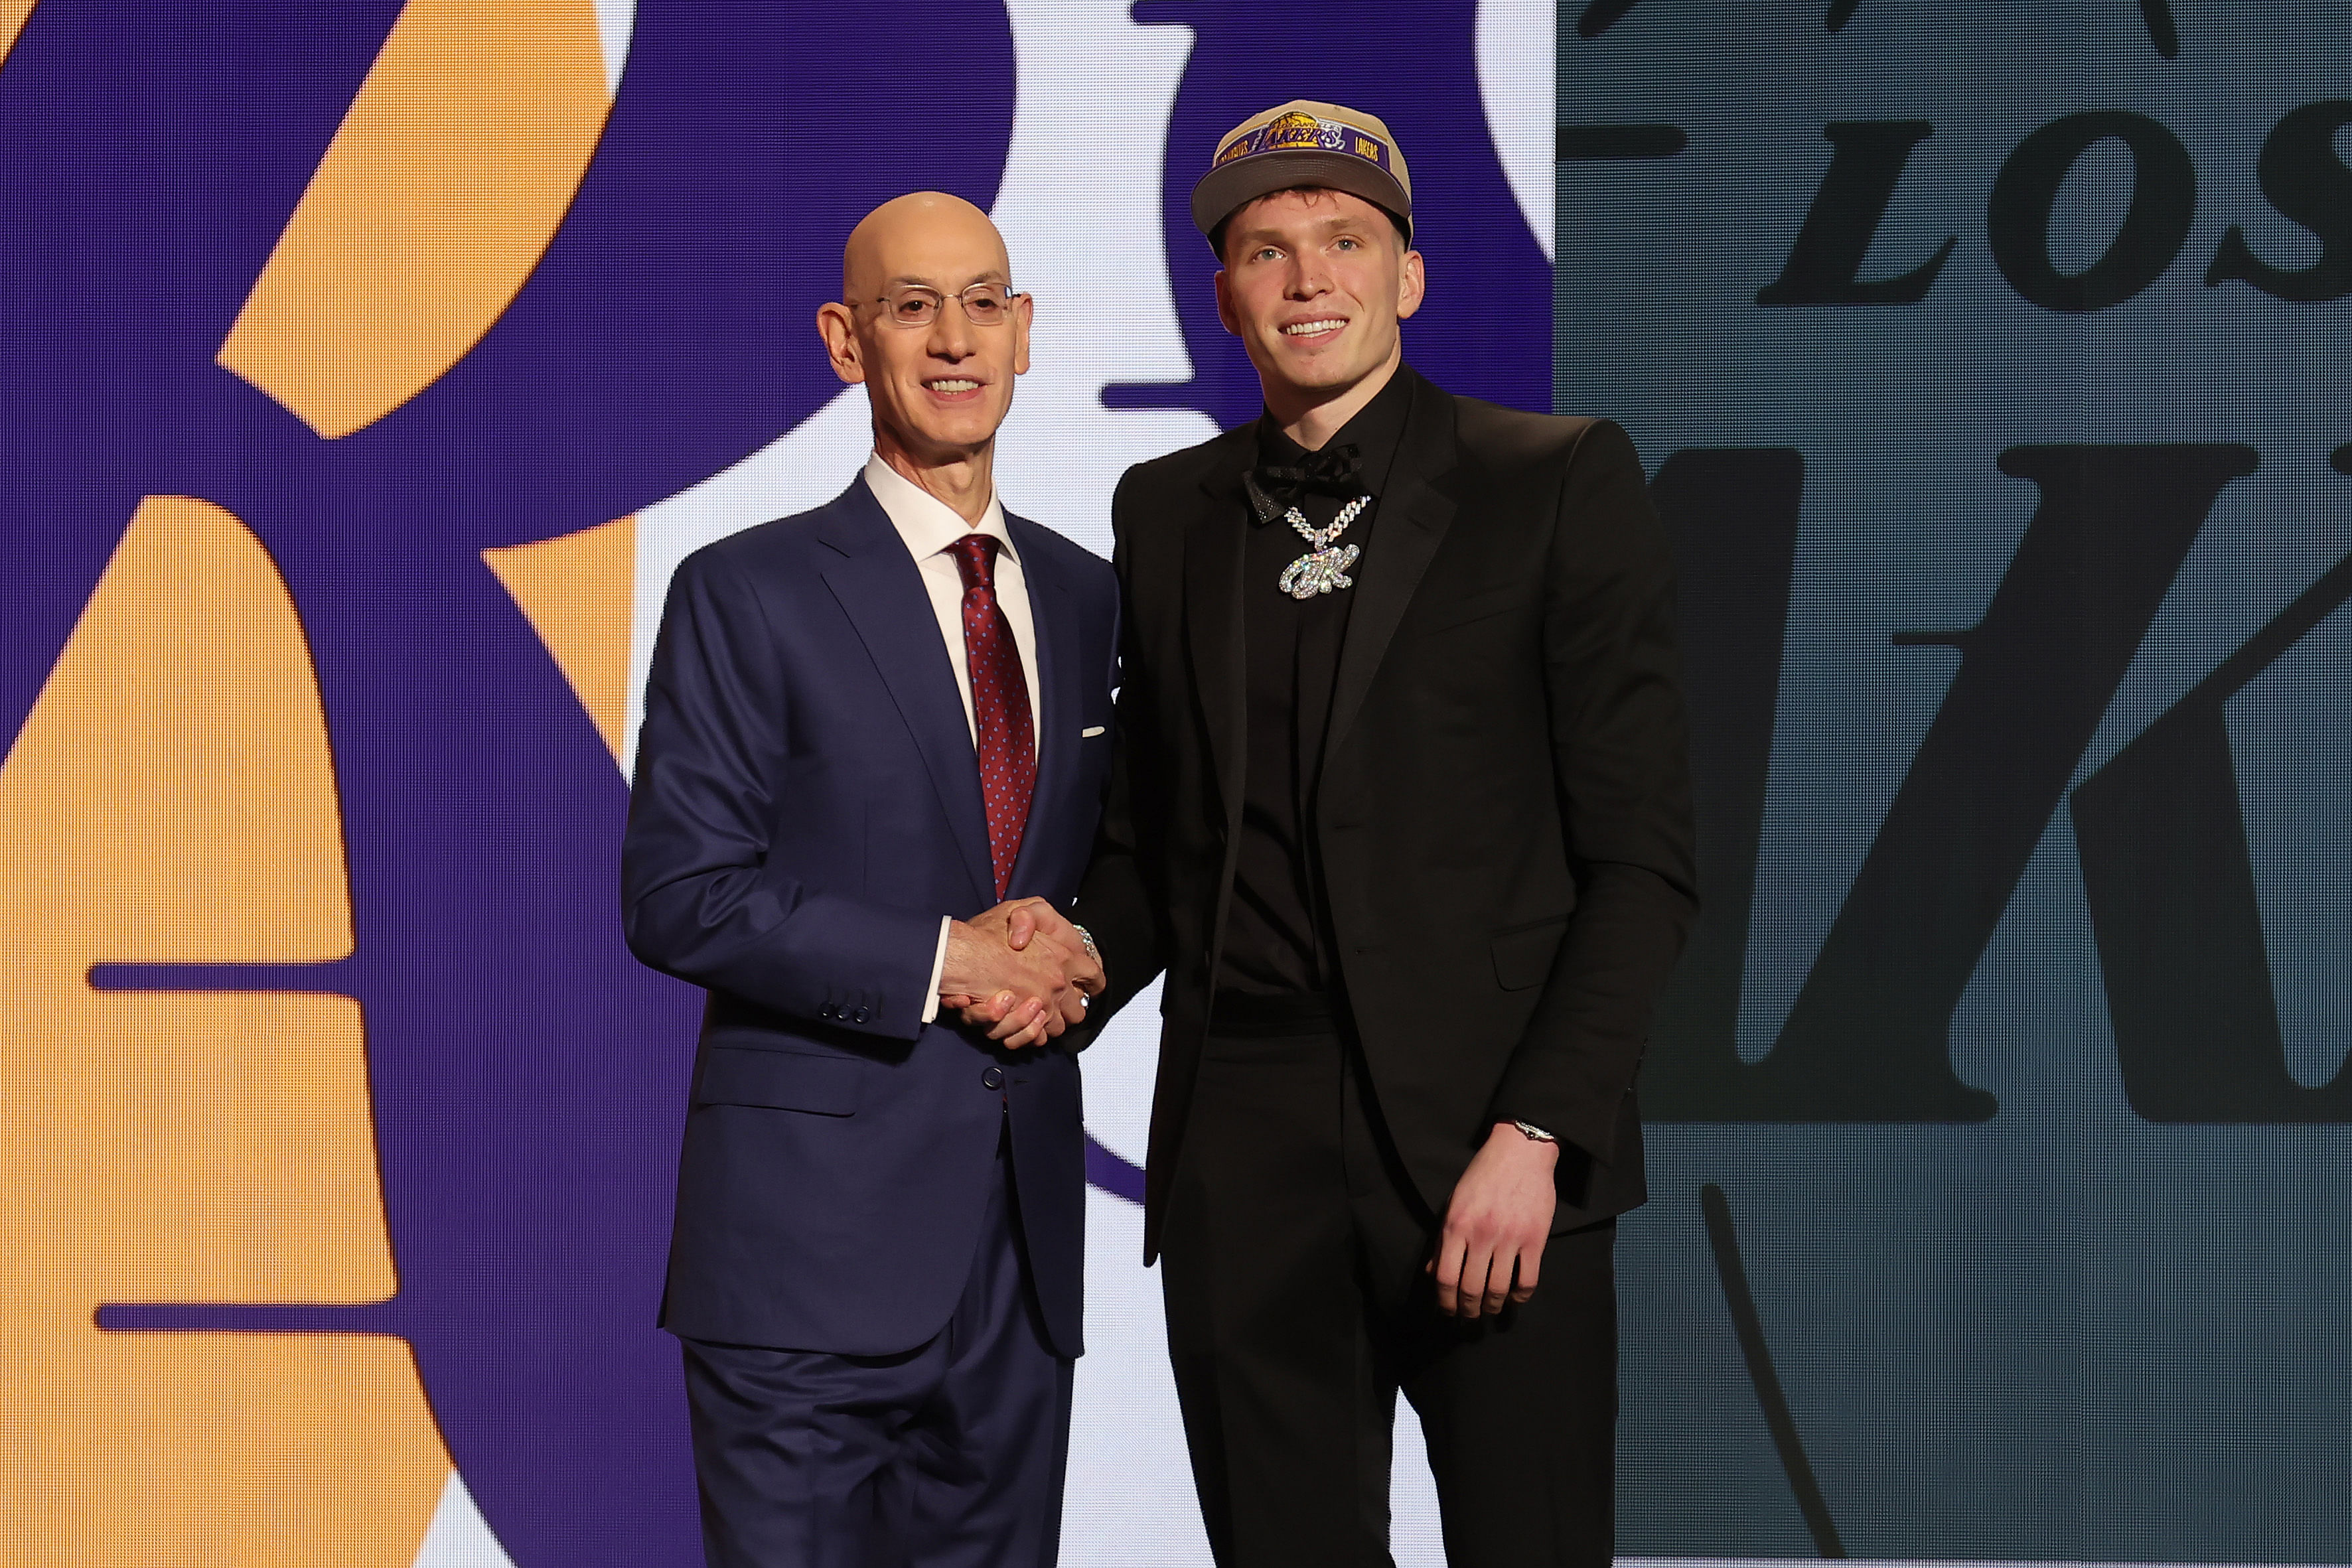 Dalton Knecht poses with NBA Commissioner Adam Silver after he was picked by the Los Angeles Lakers as their 17th overall pick in the NBA Draft. (Image Source: IMAGN)